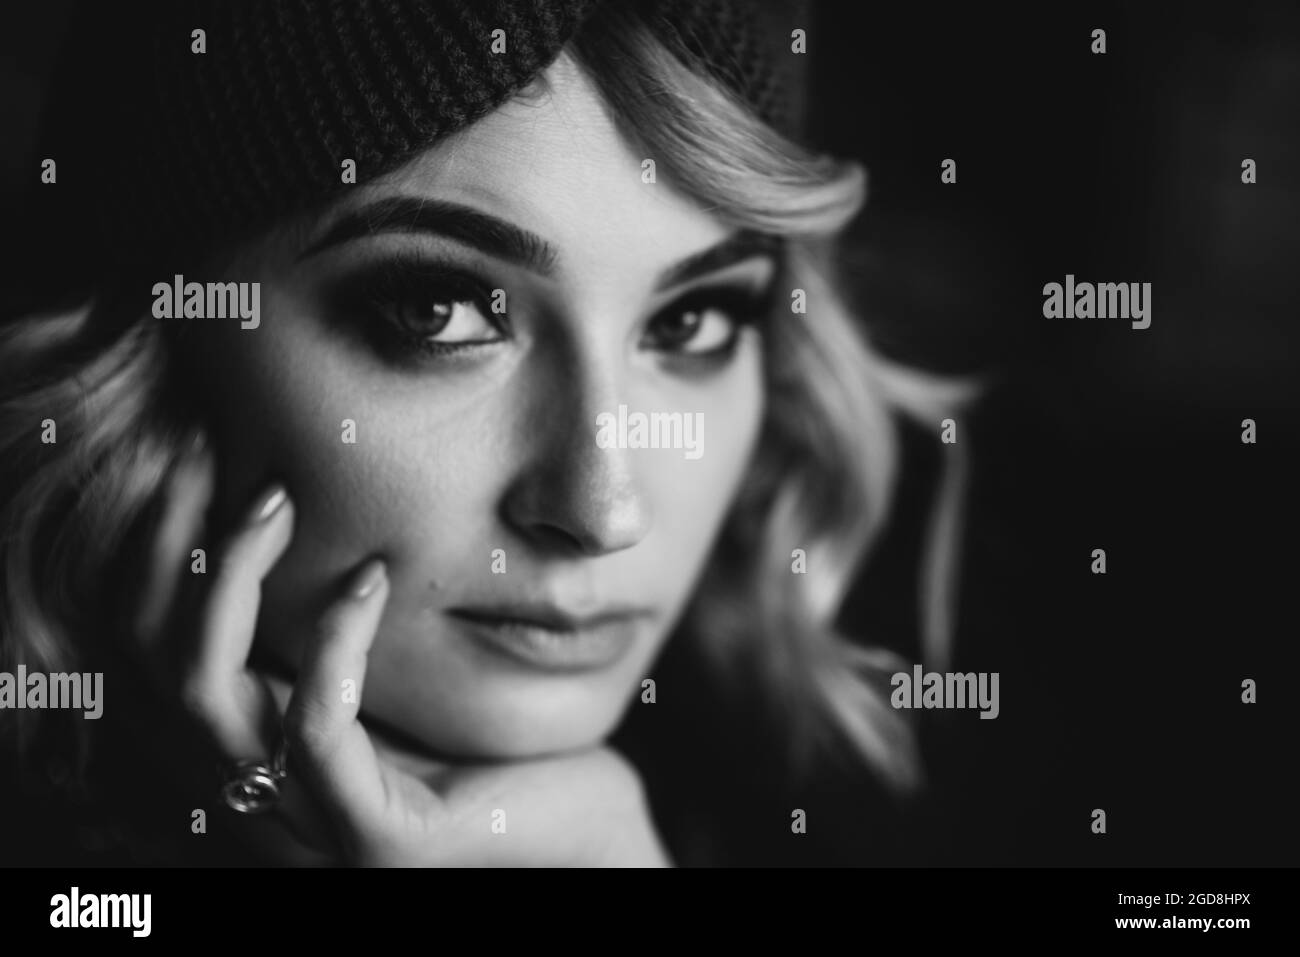 Portrait of a beautiful stylish blonde woman with smoky eye makeup in a knitted headband. Soft selective focus, defocus. Stock Photo